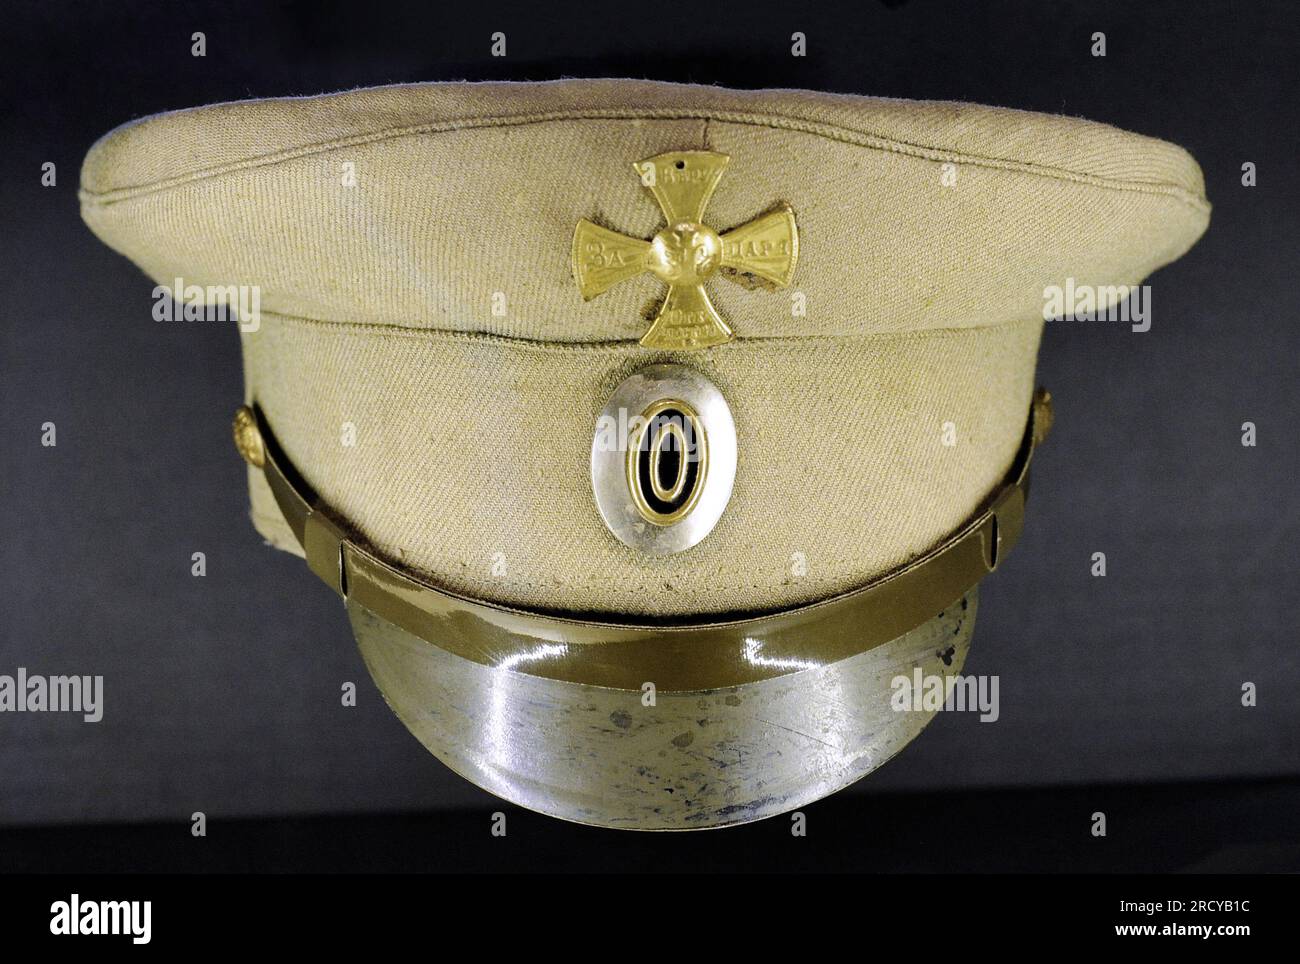 First World War (1914-1918). Russian army uniform cap with a home guard cockade. Men fit for service were conscripted into the Russian army at the beginning of the mobilisation in the summer of 1914. The conscripted home guards were organized into companies and battalions separately from other units. Before receiving full equipment and uniforms, they were endowed only with a rifle and a cap with Russian Army and home guard badges. Latvian War Museum. Riga. Latvia. Stock Photo